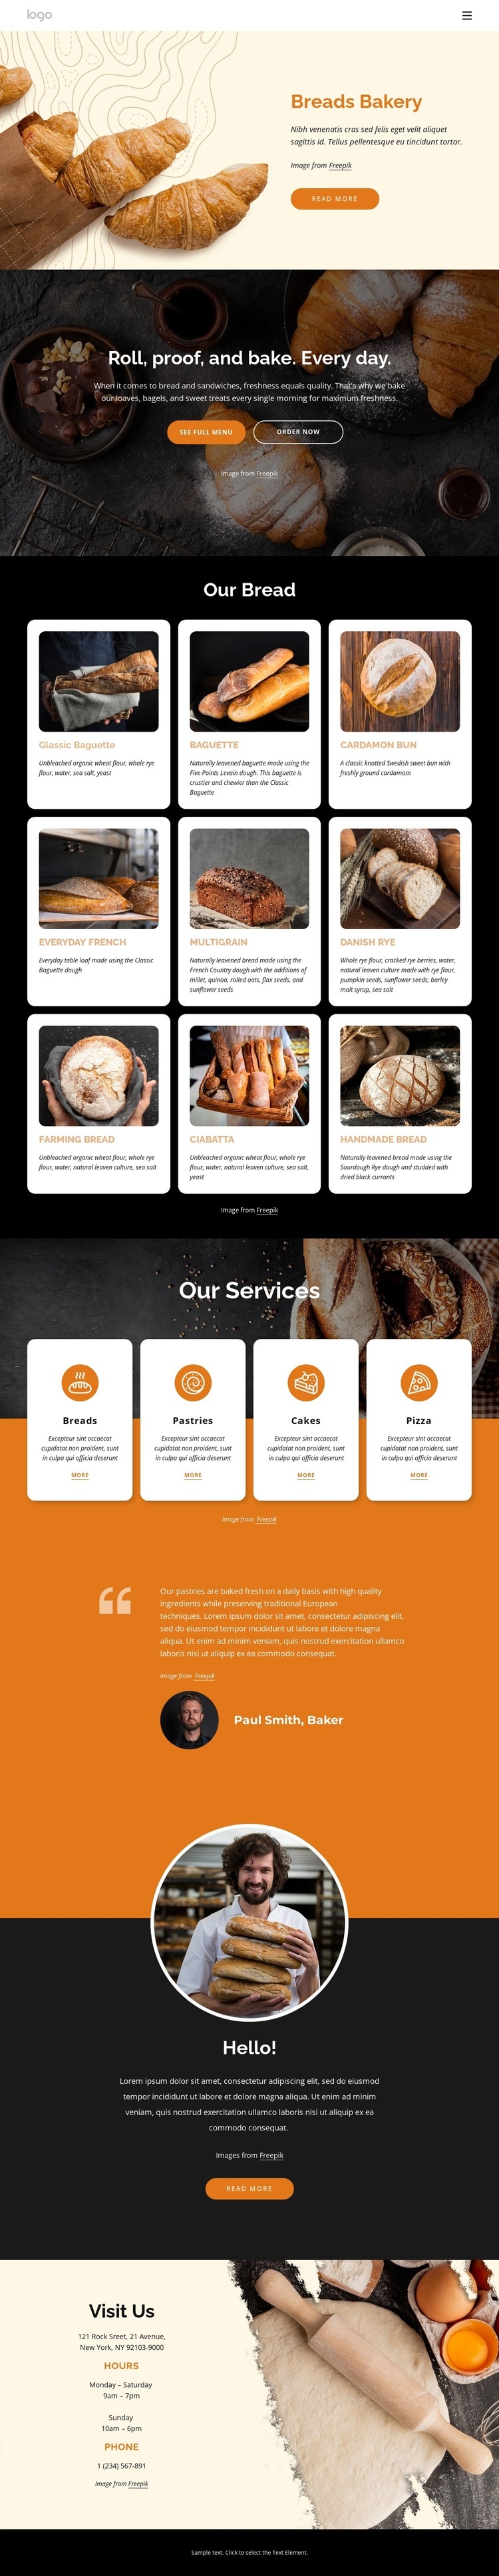 Classic baked goods Web Page Design